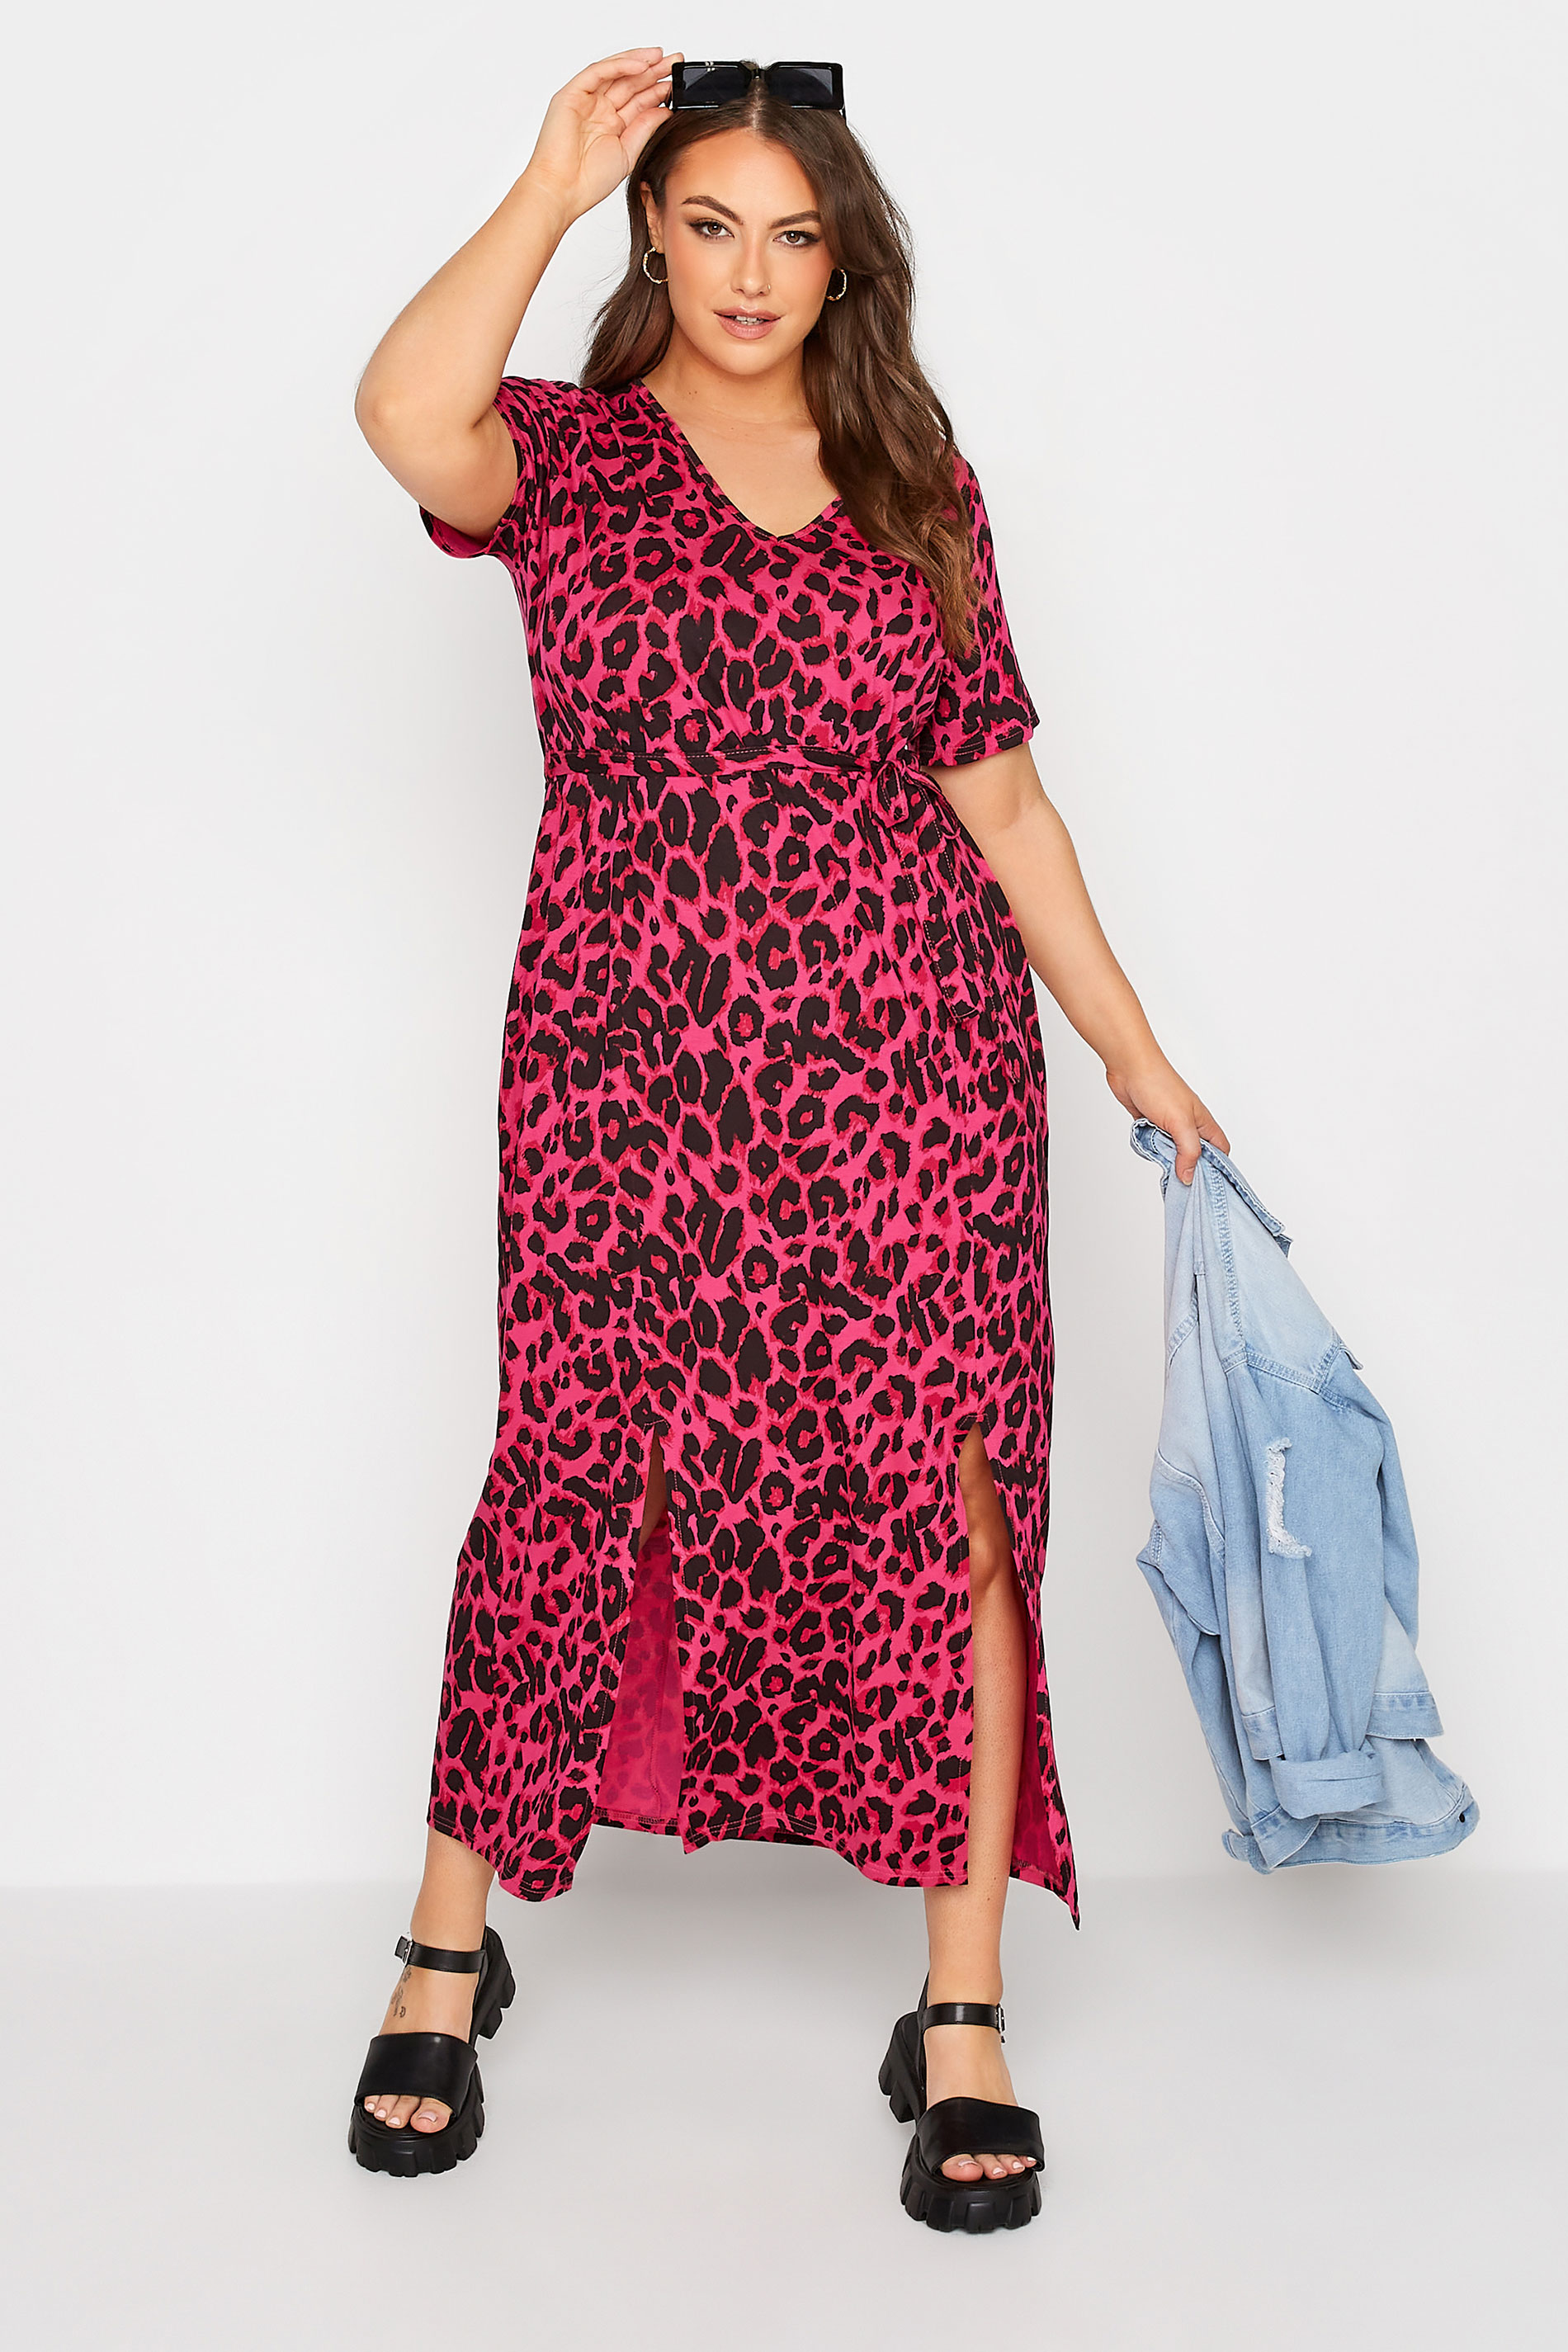 Robes Grande Taille Grande taille  Robes Longues | LIMITED COLLECTION - Robe Rose Fushia Léopard en Maxi - DH53892